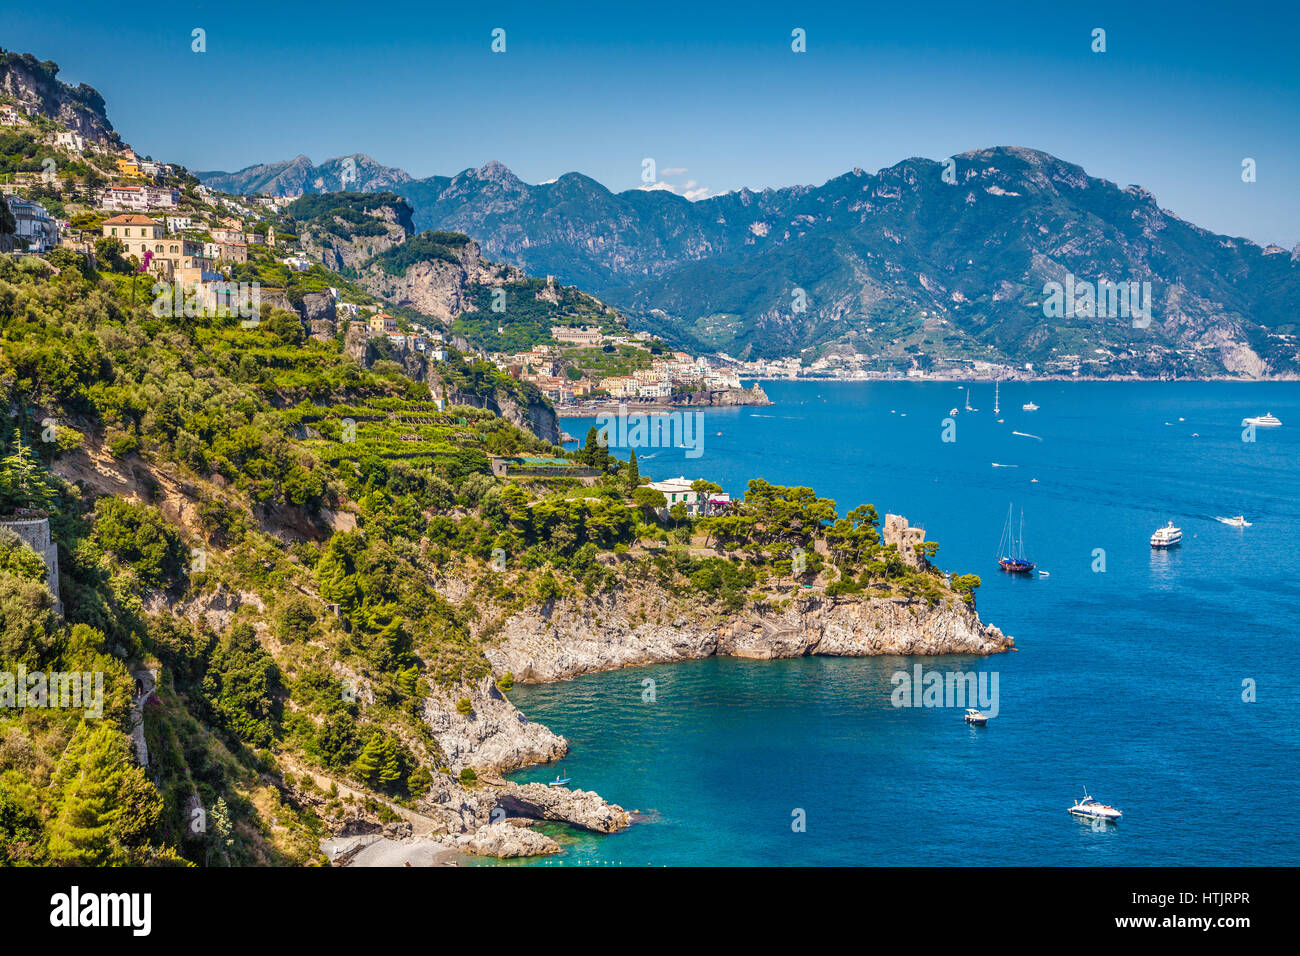 Scenic picture-postcard view of famous Amalfi Coast with beautiful Gulf of Salerno, Campania, Italy Stock Photo